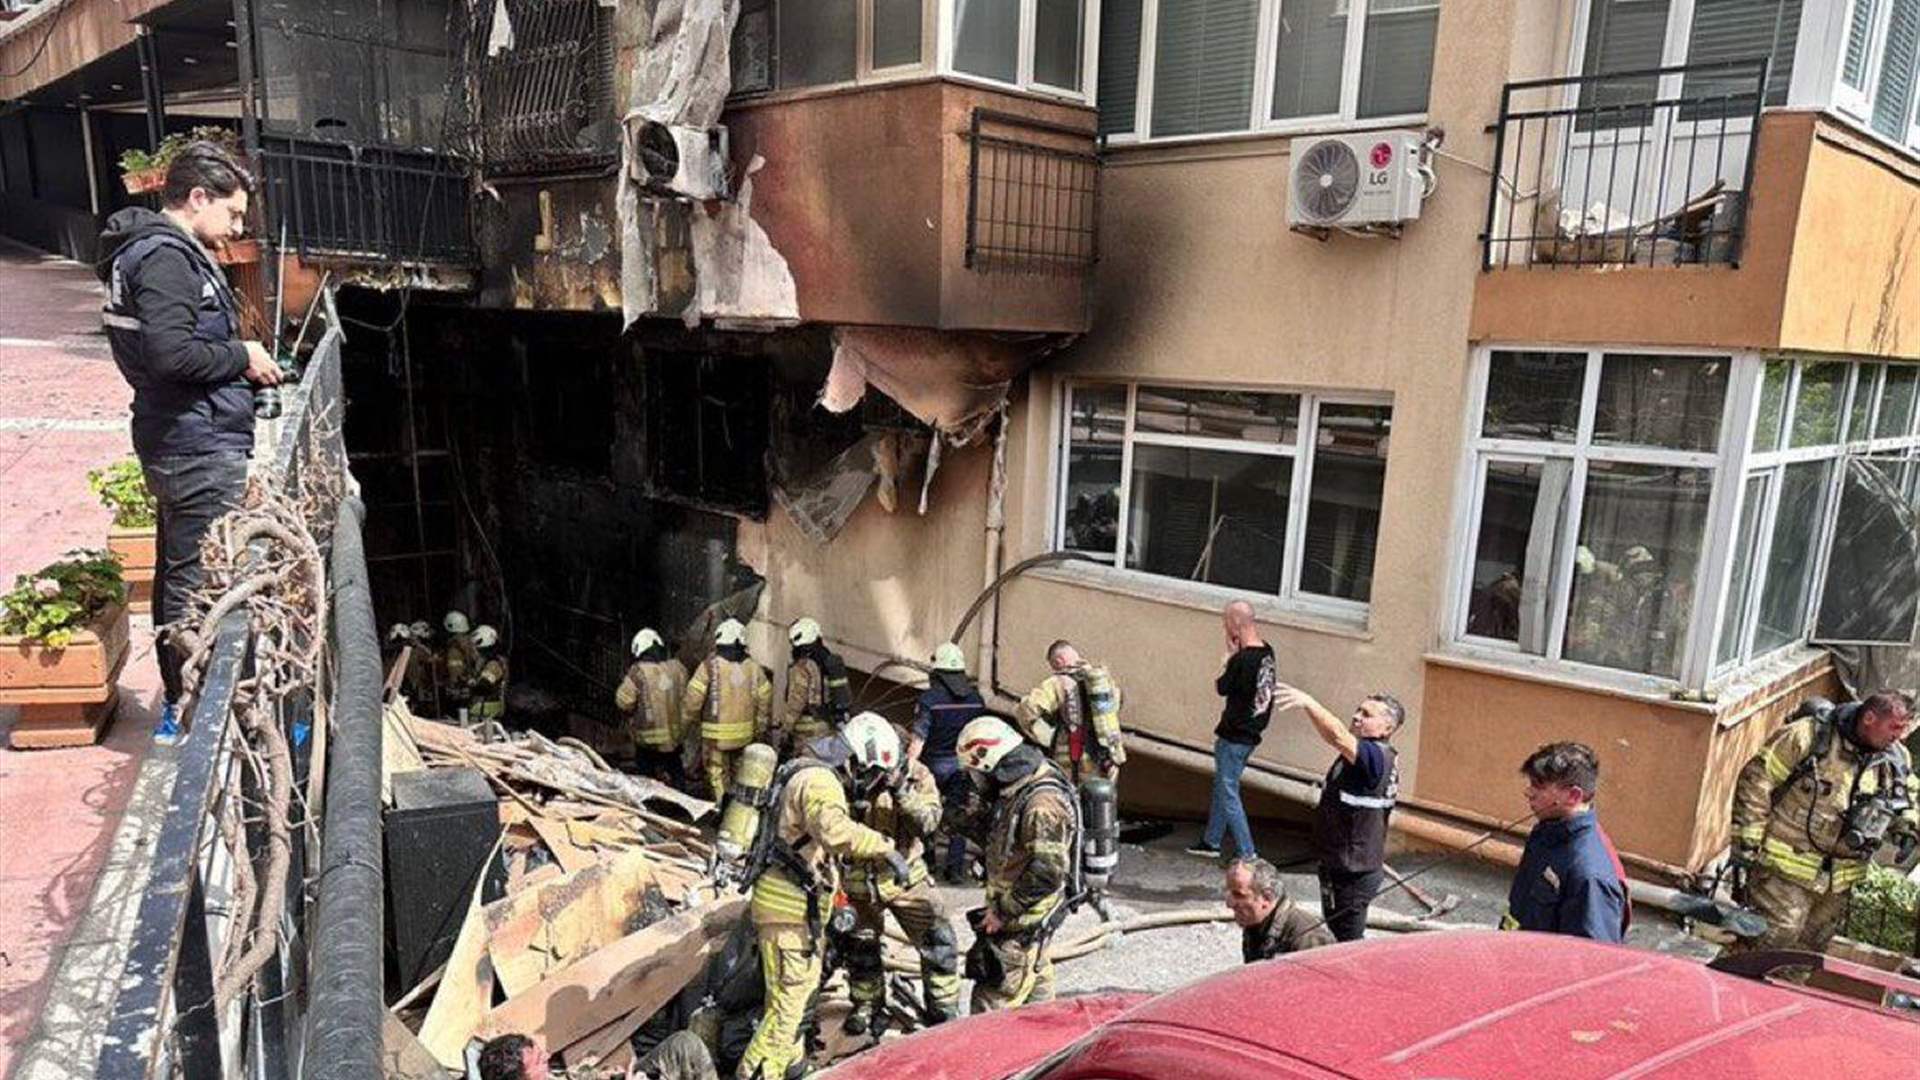 Fifteen people killed, others injured in nightclub fire in Istanbul